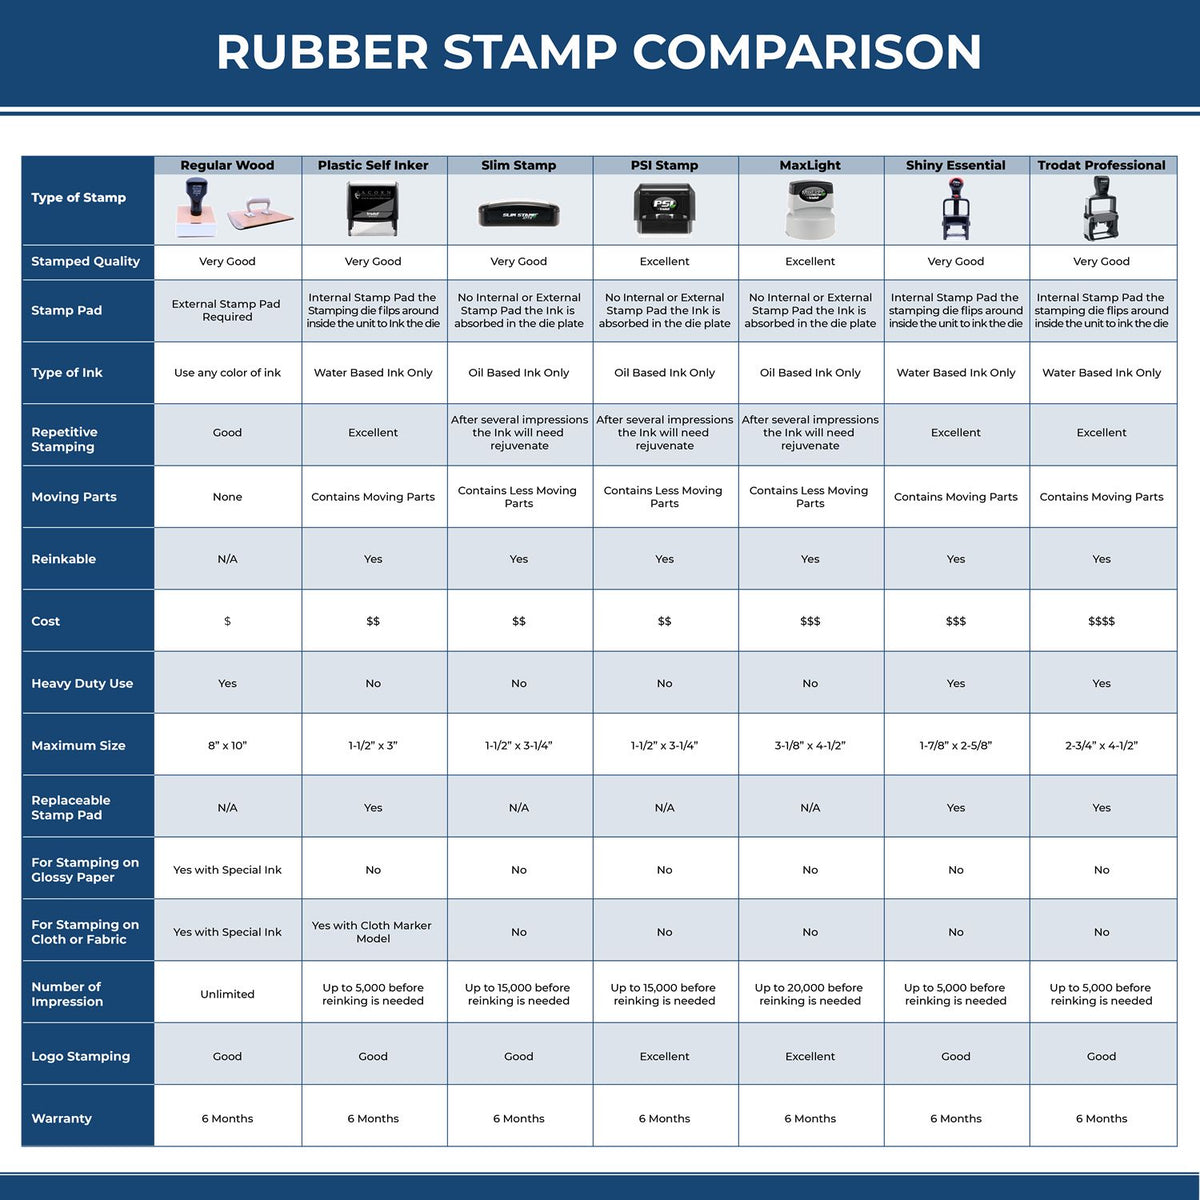 A comparison chart for the different types of mount models available for the Self-Inking Rhode Island Landscape Architect Stamp.